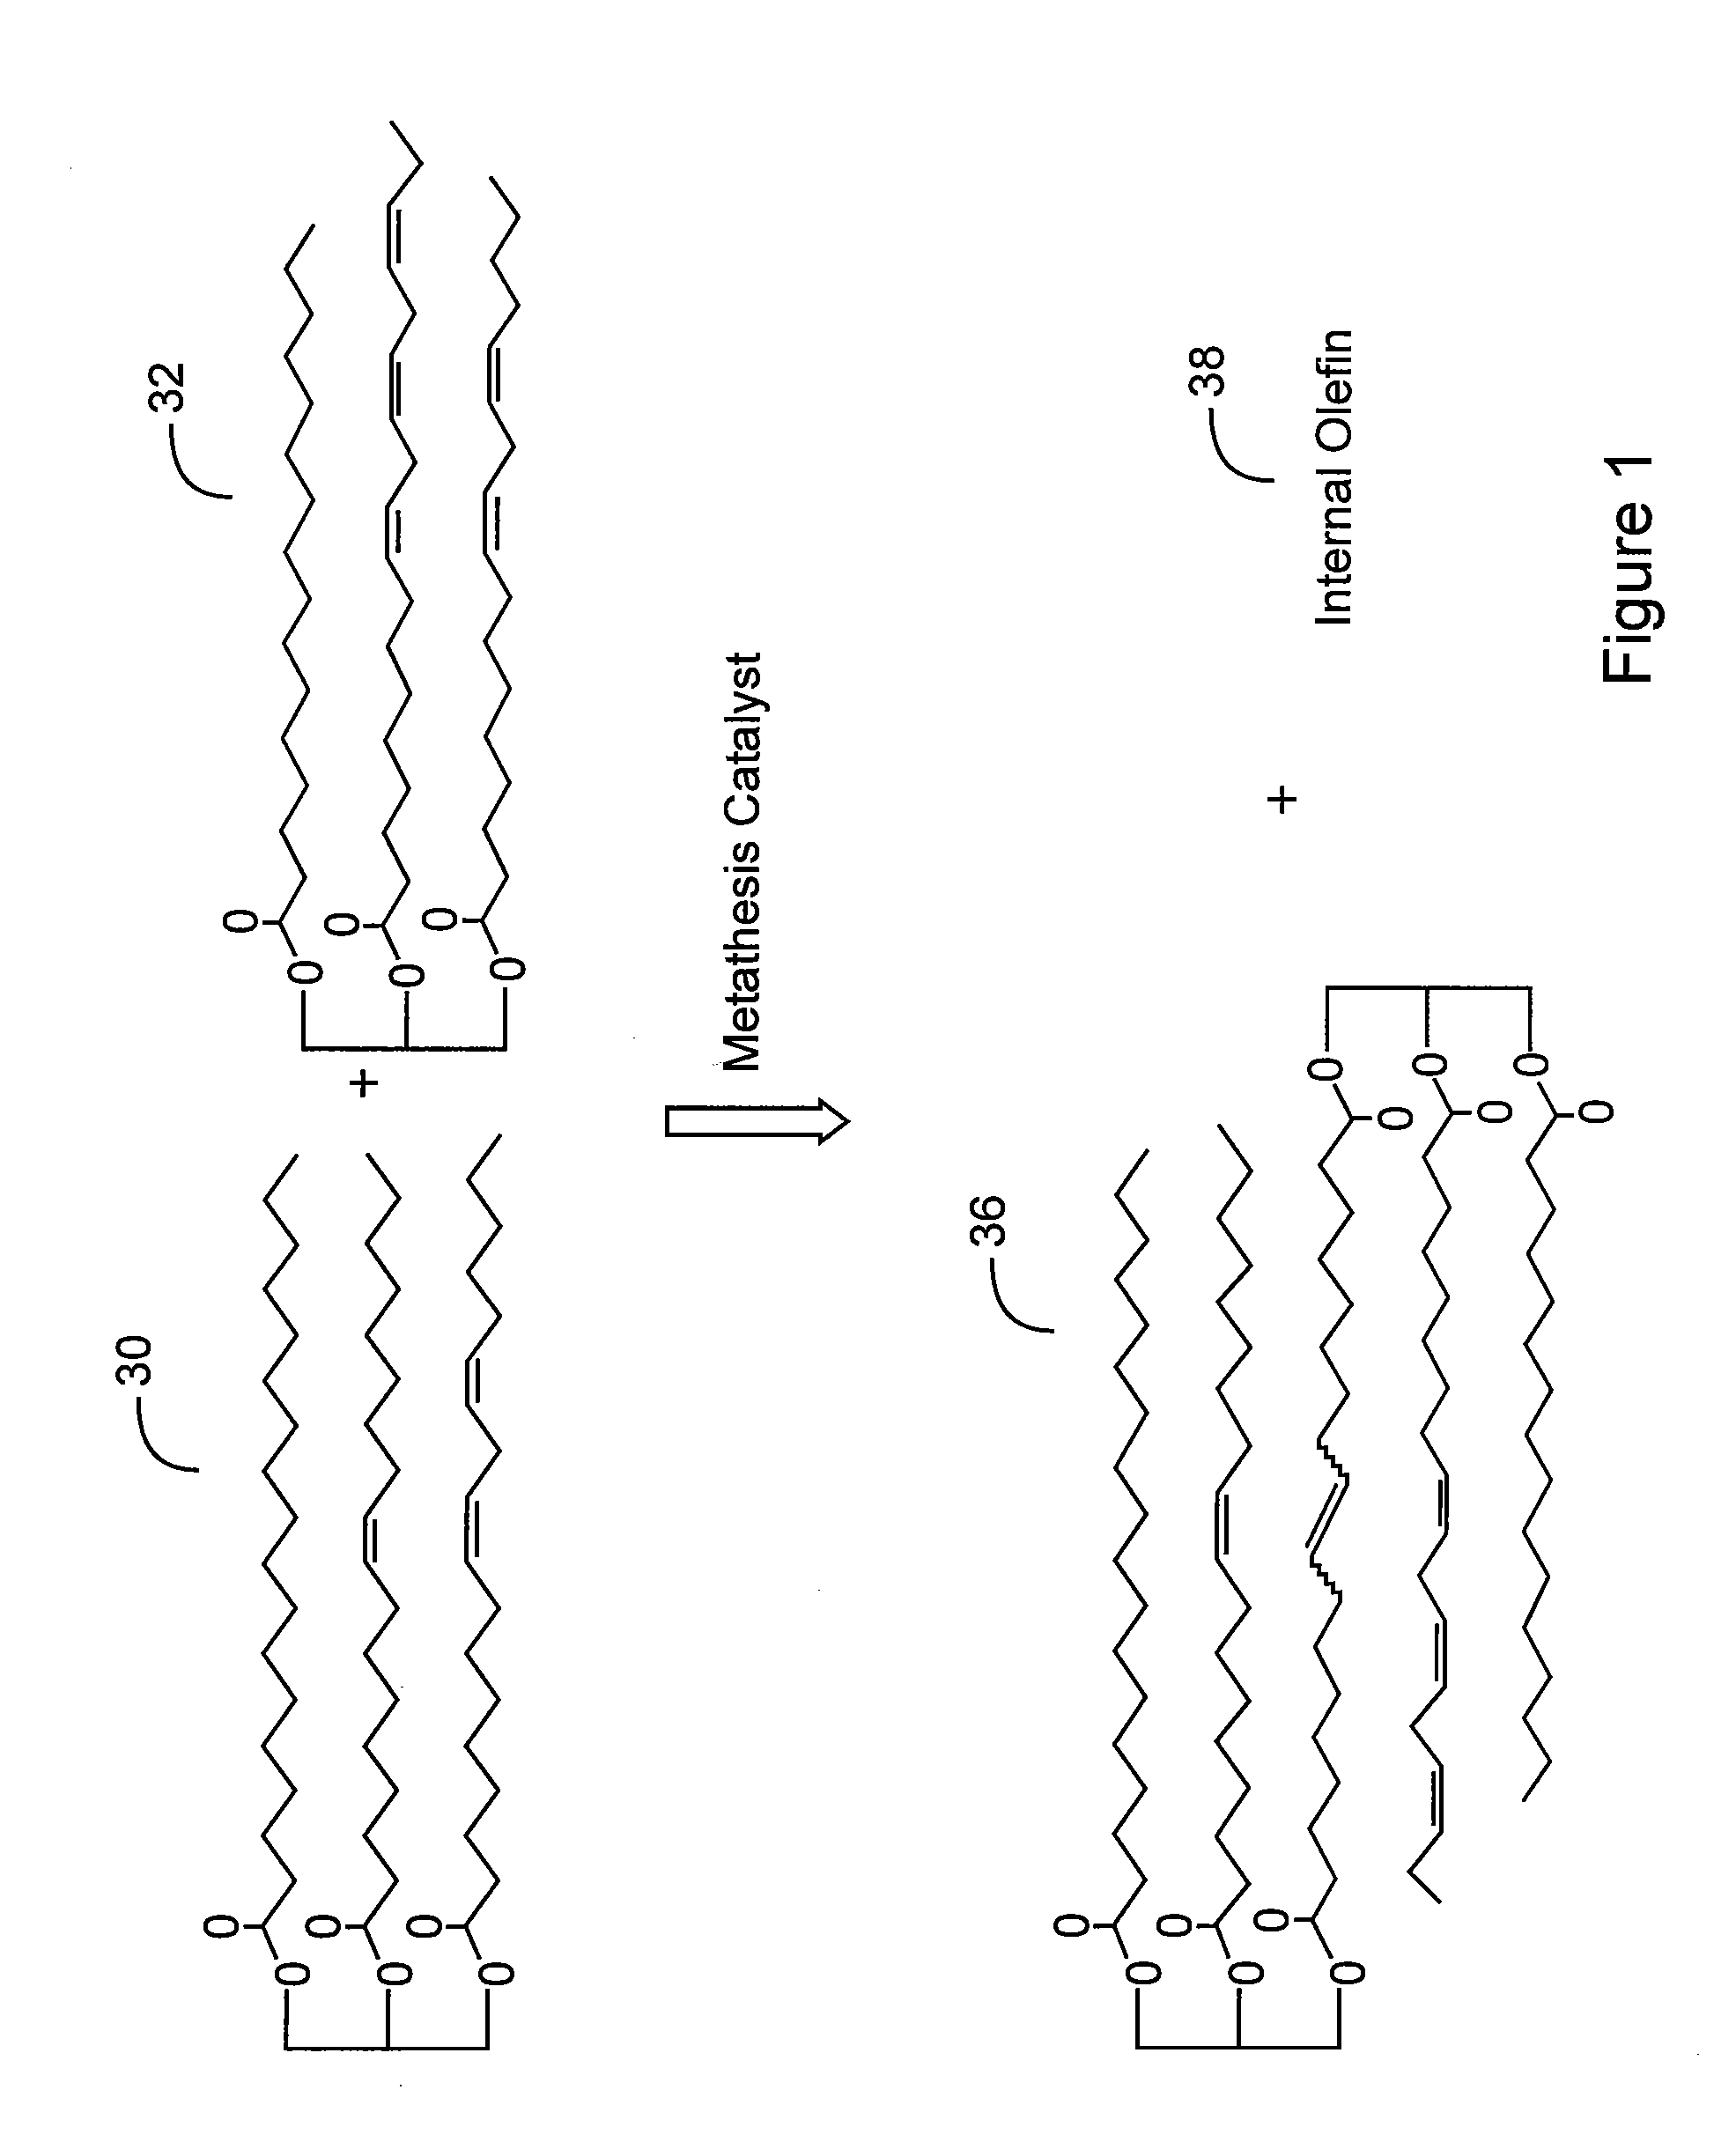 Hybrid wax compositions for use in compression molded wax articles such as candles